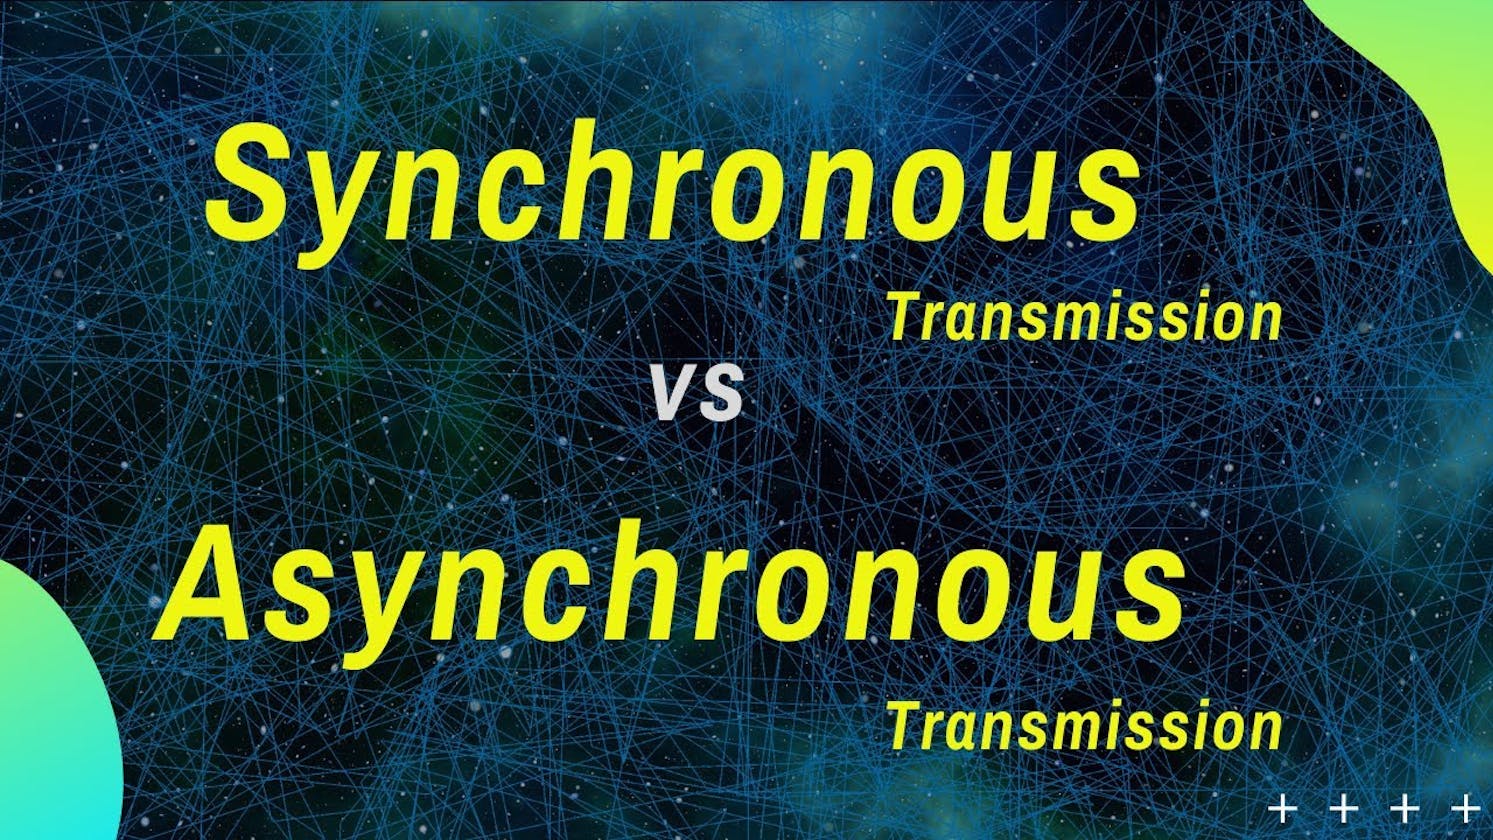 Explain Synchronous and Asynchronous Transmission with examples. Mention advantages, disadvantages and difference between them.